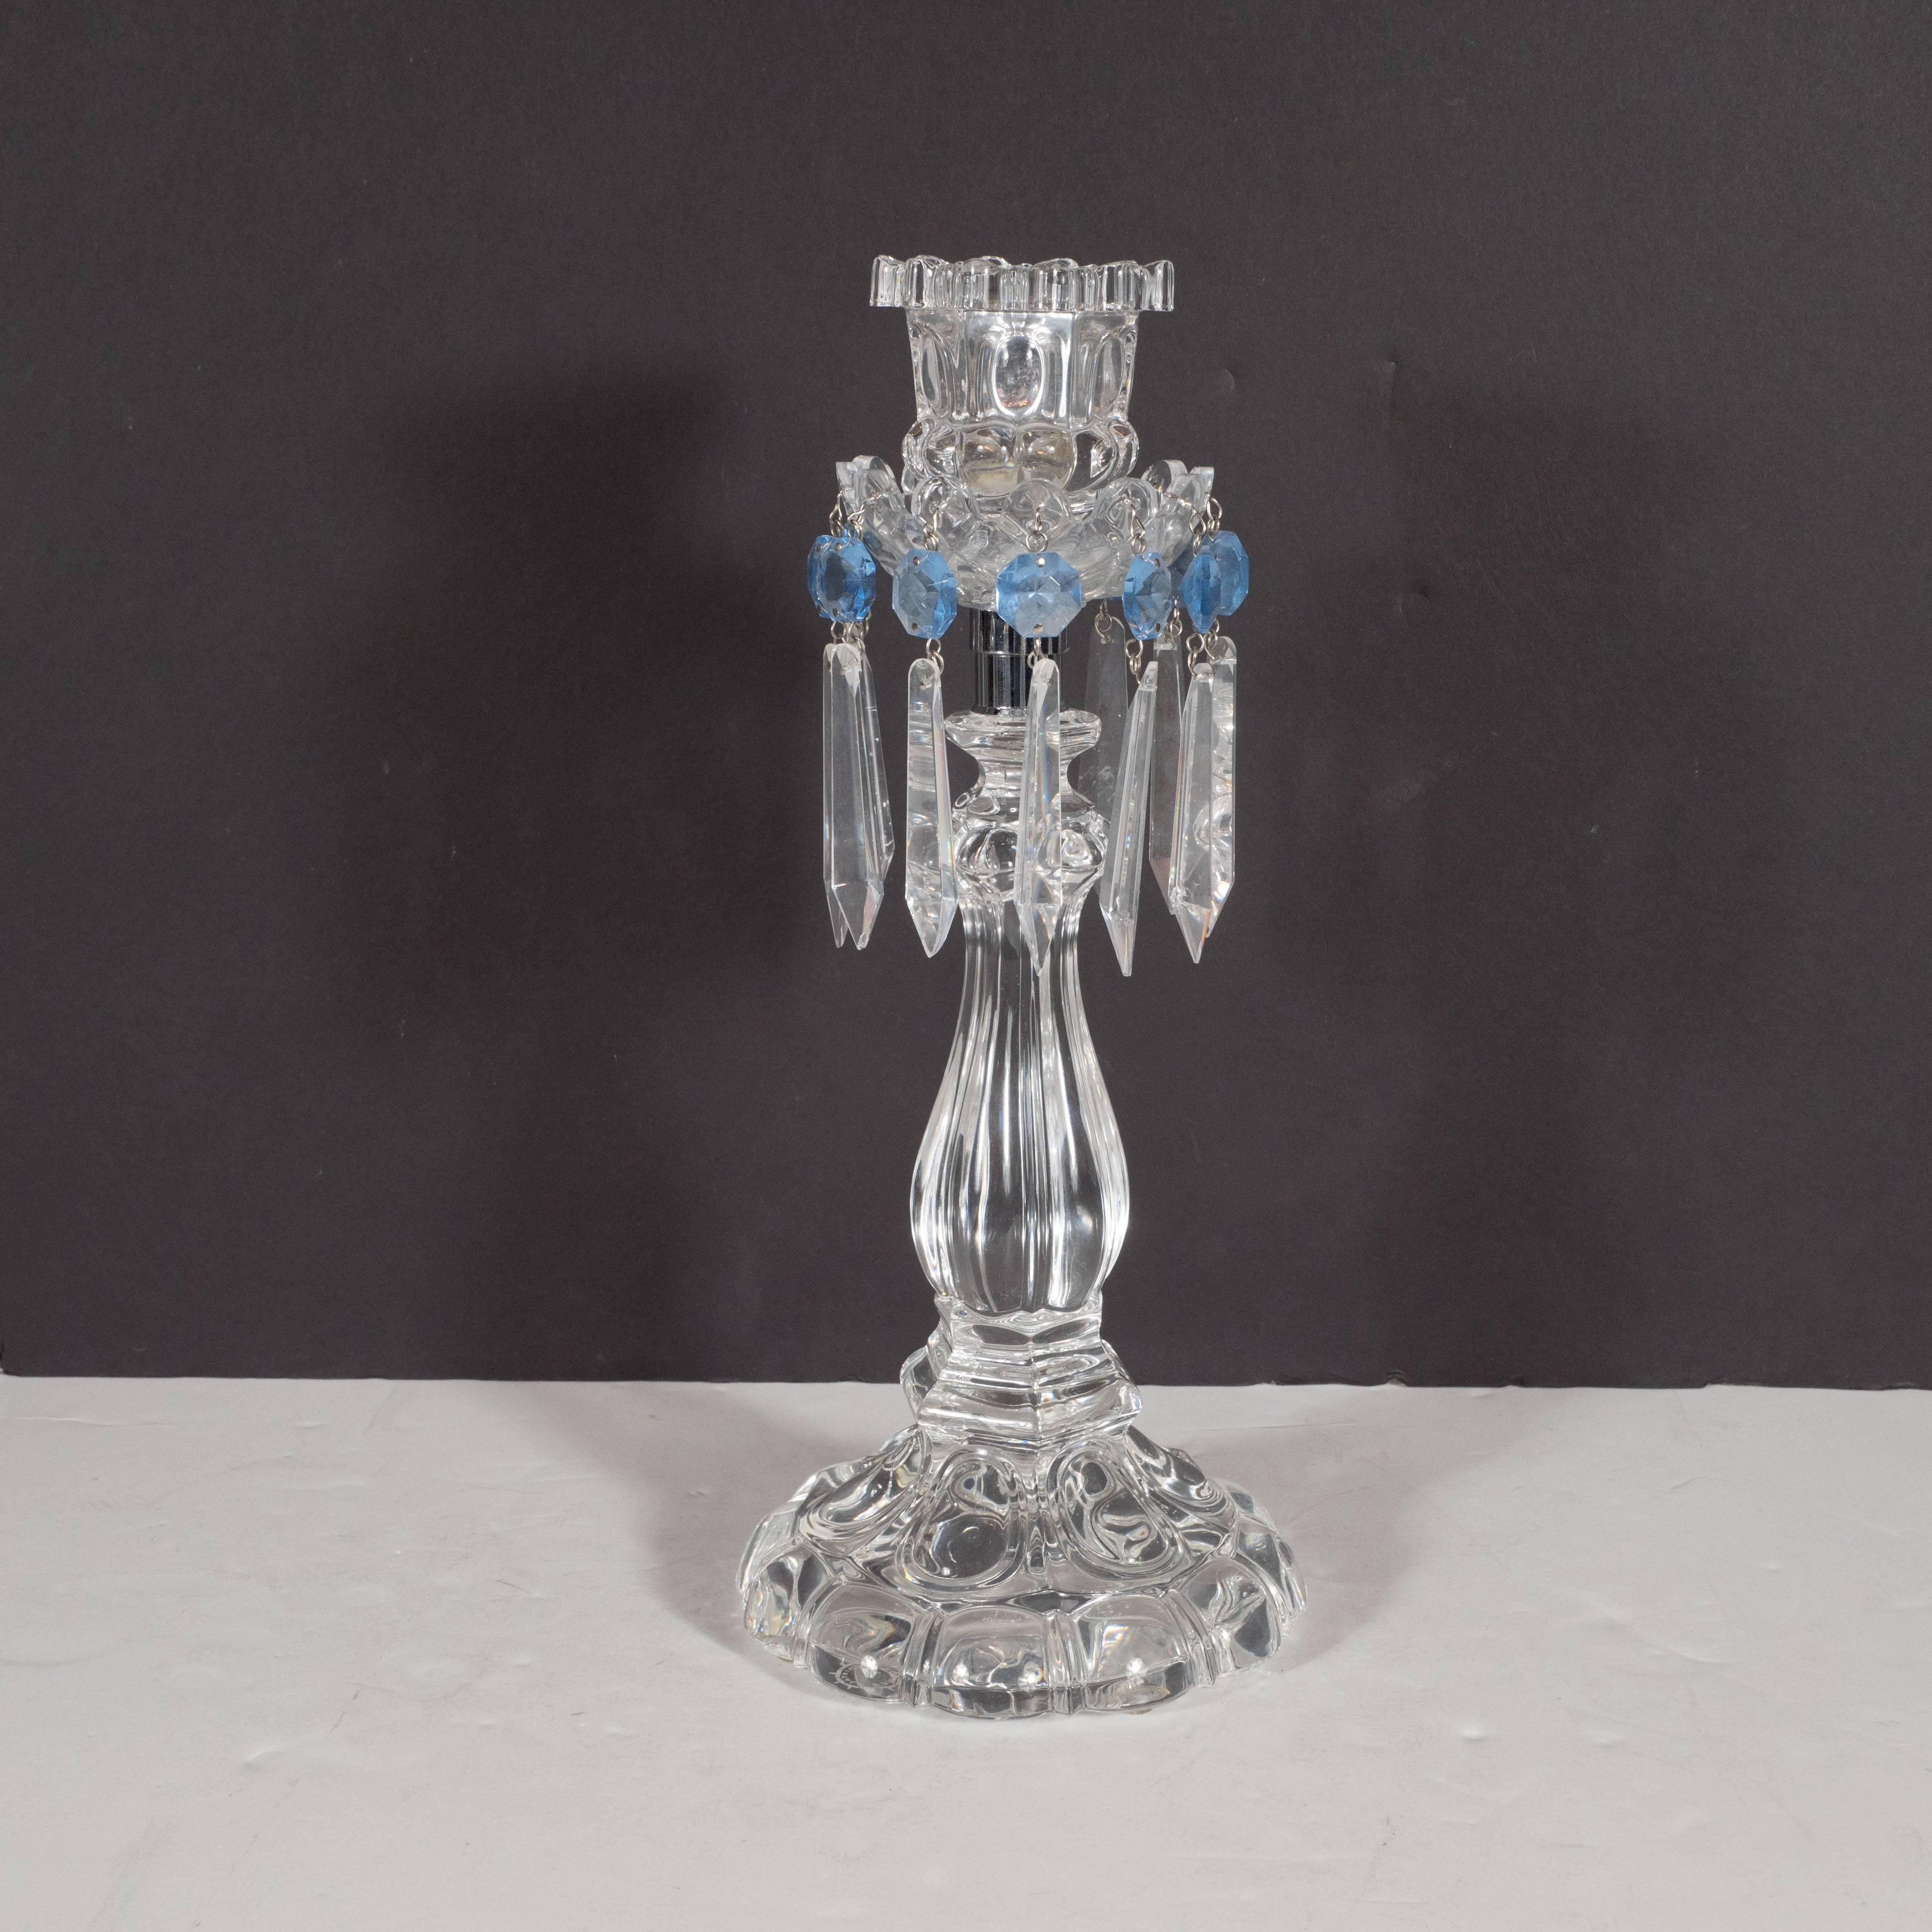 This exquisite pair of Mid-Century Modern crystal girandoles were realized by the esteemed French luxury house Baccarat. They feature reeded columnar central stems with a diamond etched bobeche below a scalloped top. The columns connect to the